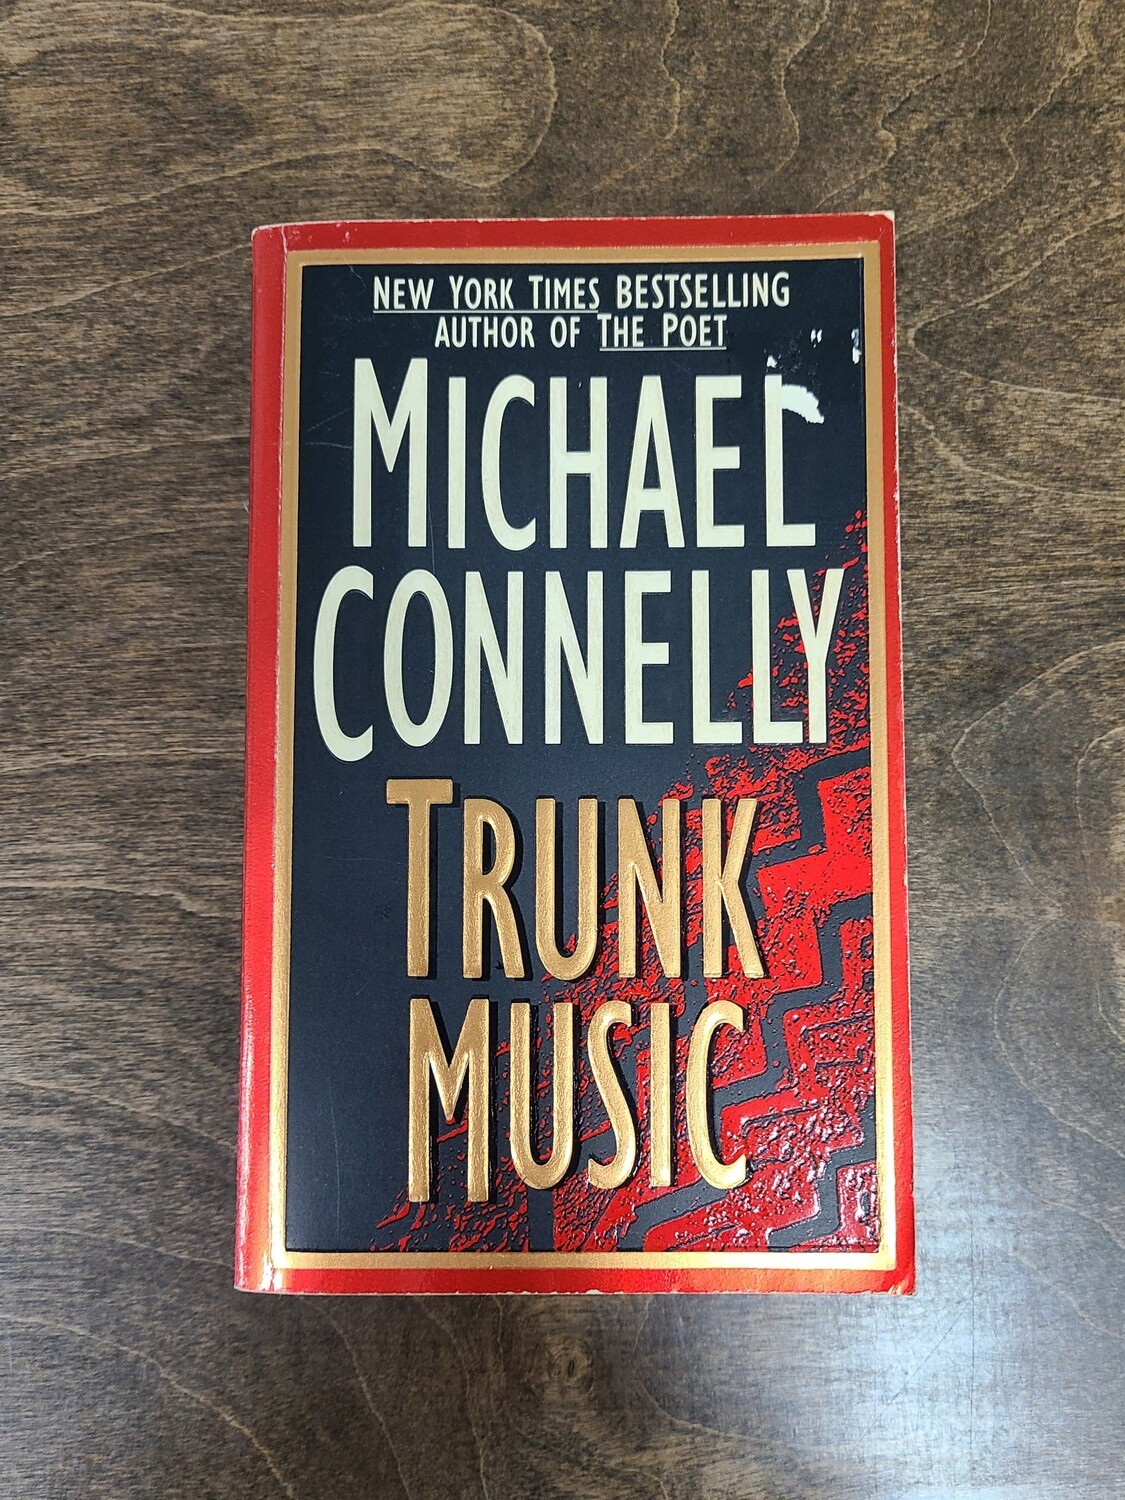 Trunk Music by Michael Connellly